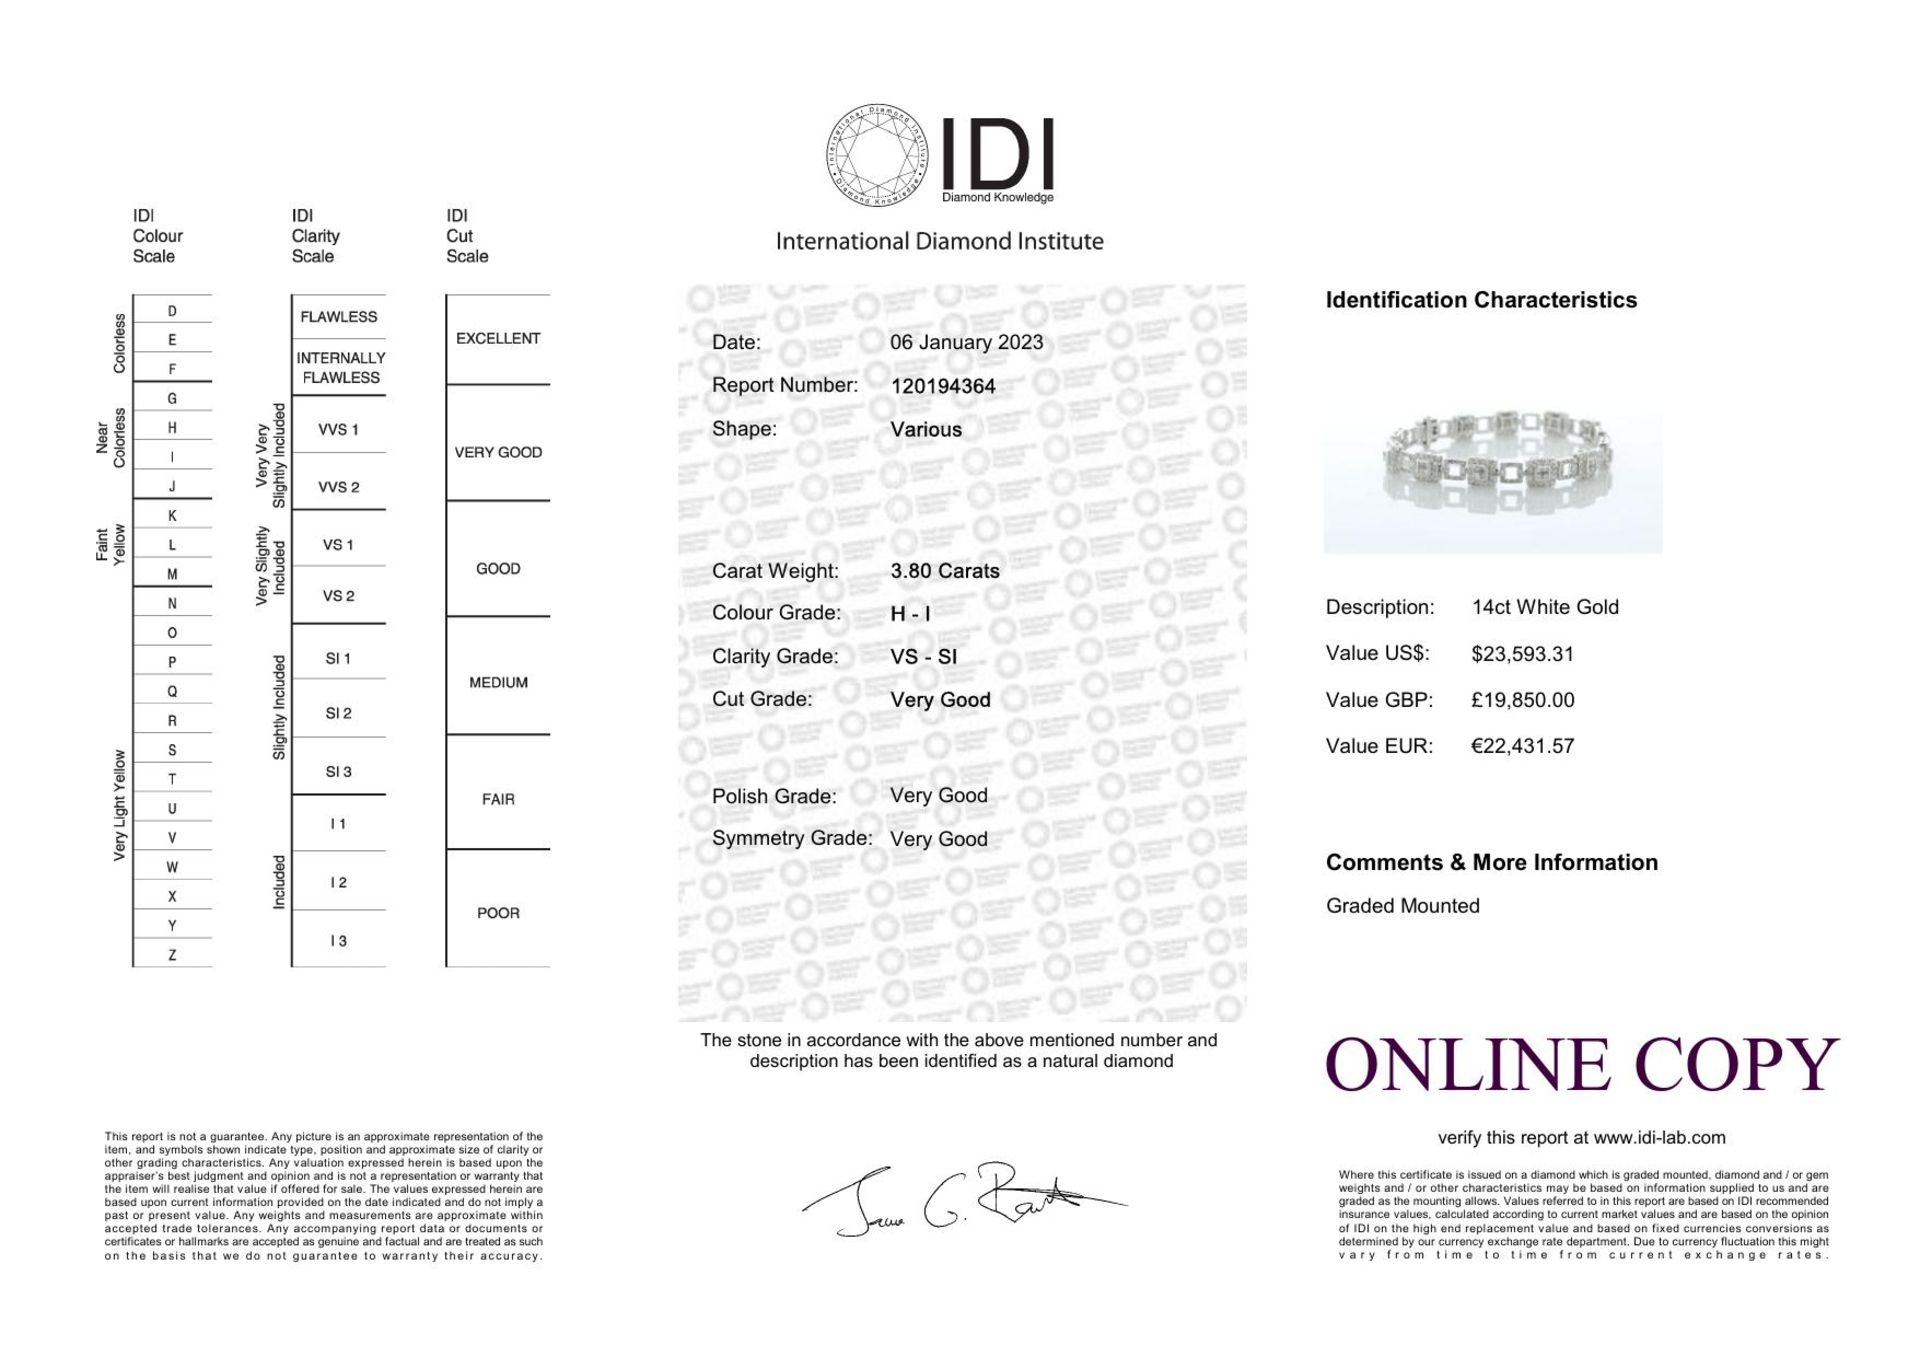 14ct White Gold Full Eternity Diamond Bracelet 3.80 Carats - Valued By IDI £19,850.00 - This - Image 4 of 4